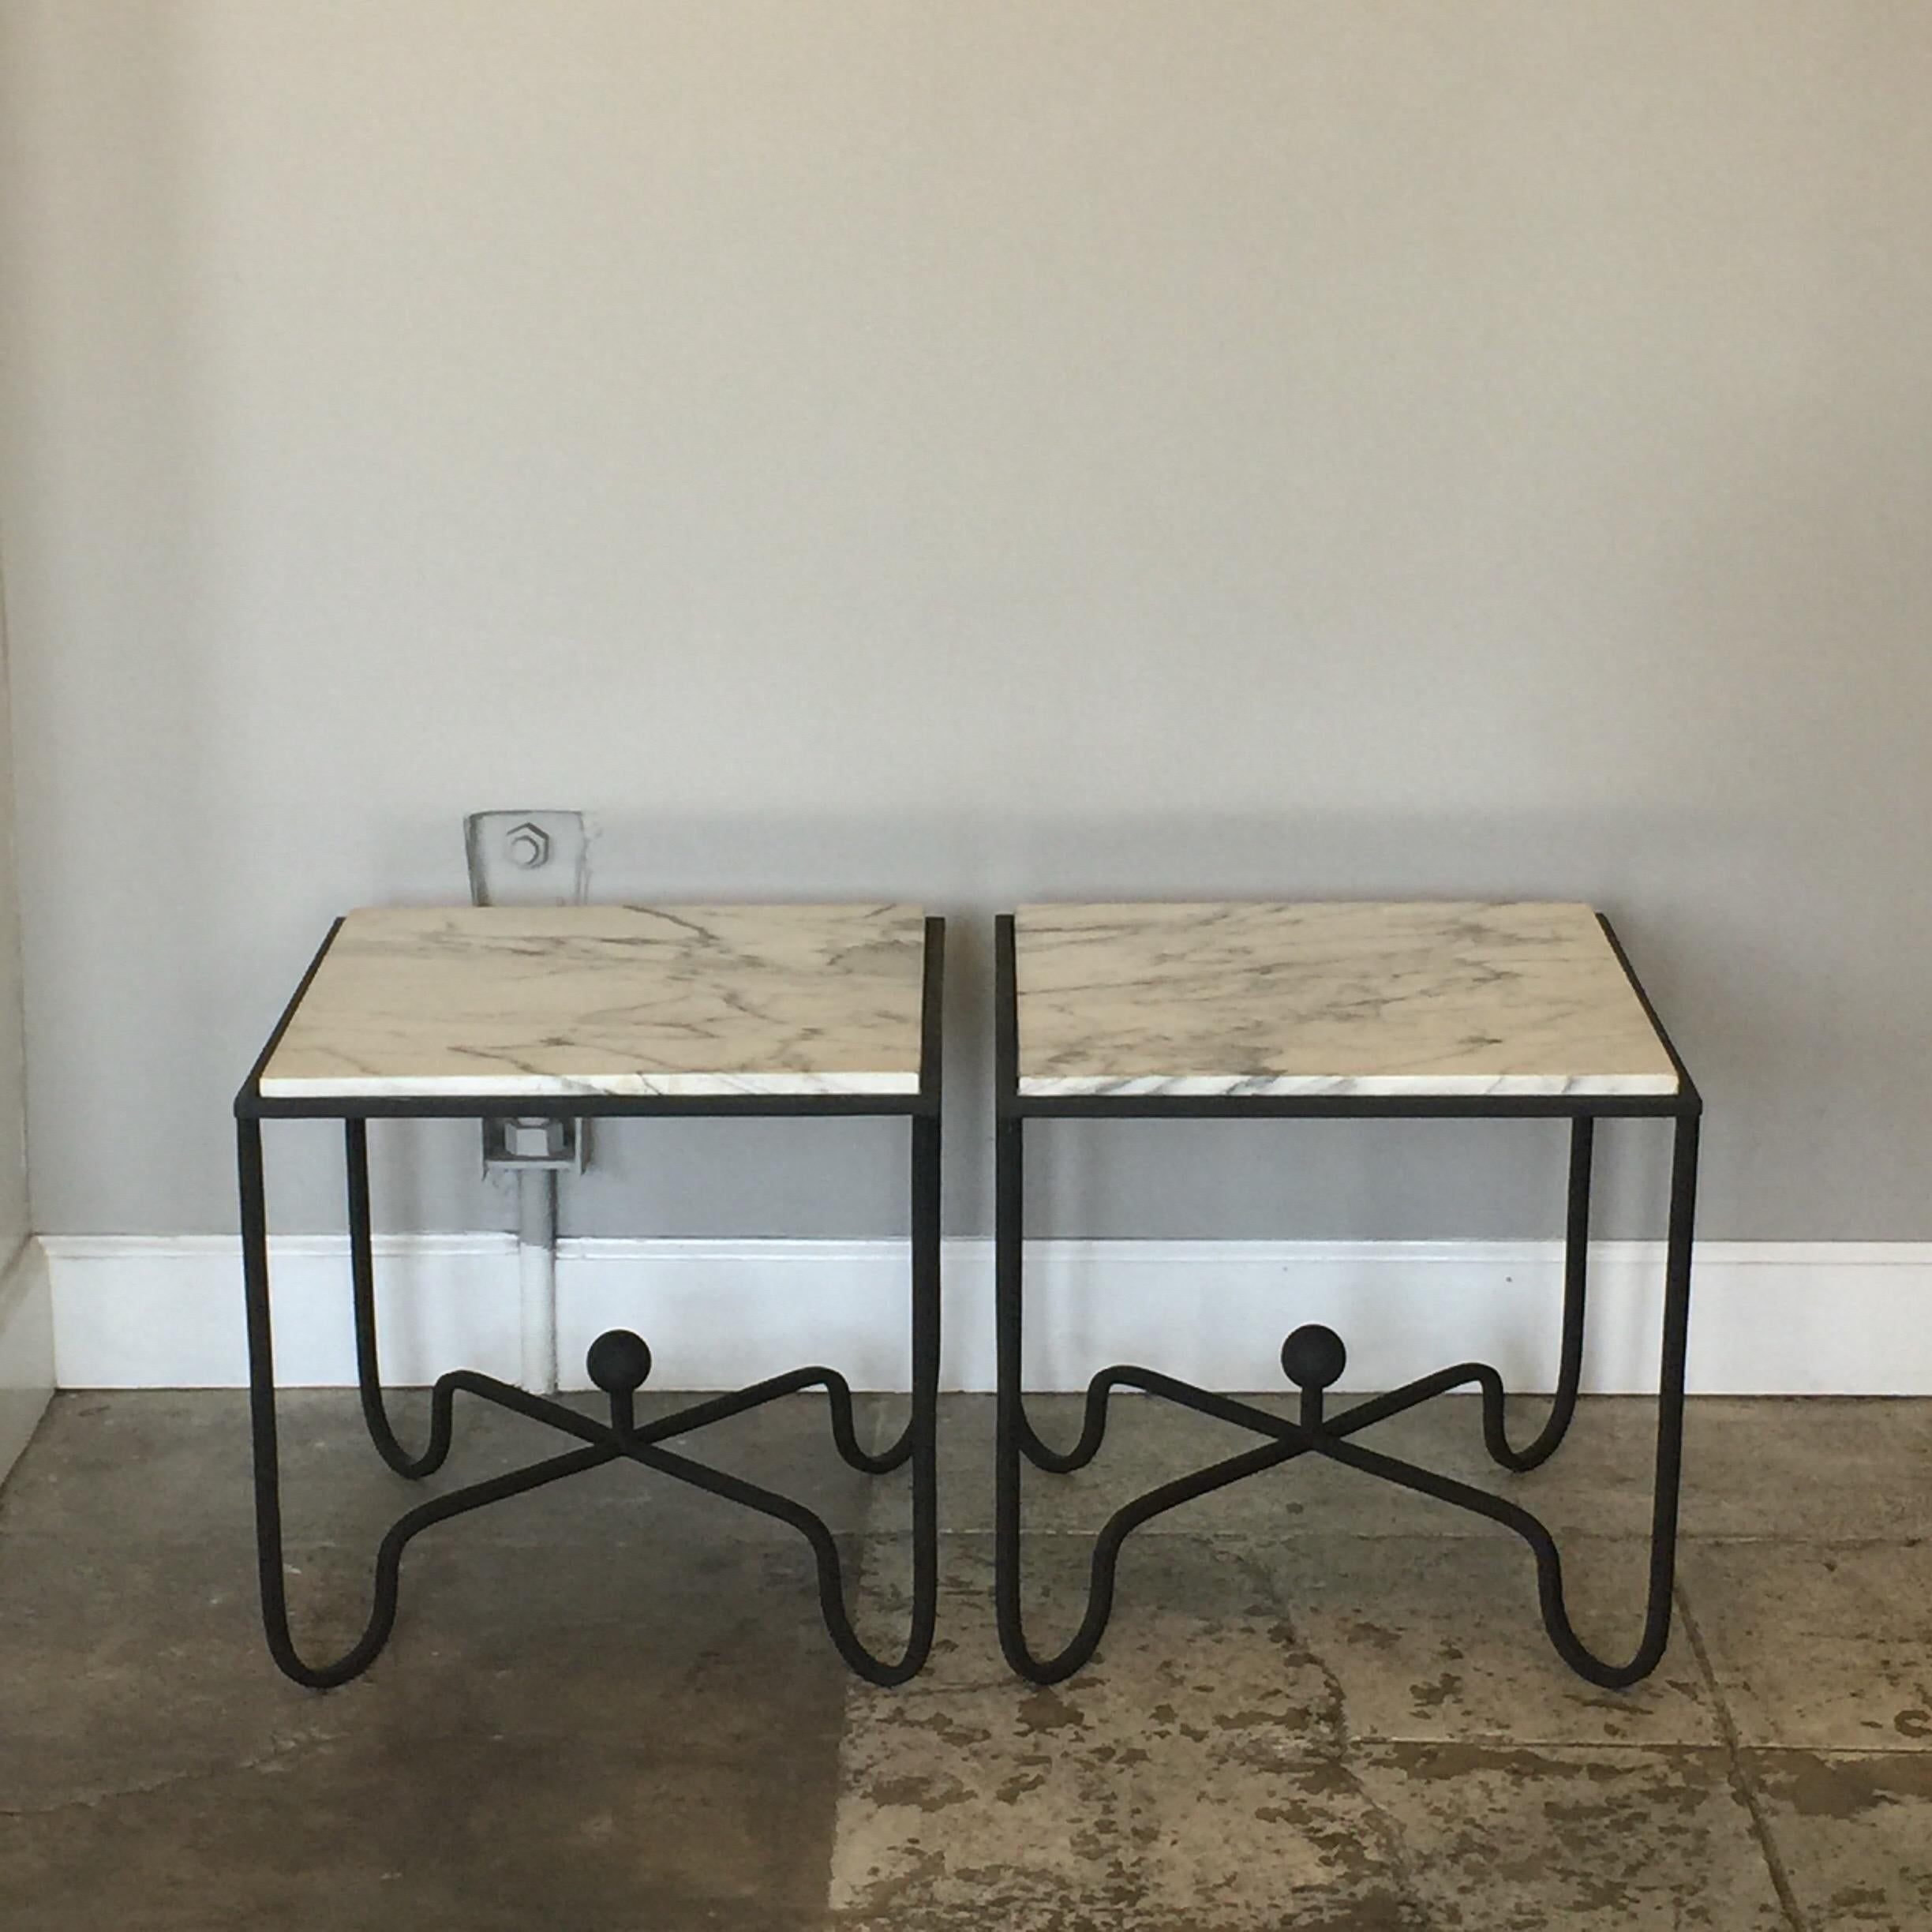 Chic pair of wrought Iron and marble 'Entretoise' side tables by Design Frères. Matte black wrought iron bases with polished white veined marble tops.